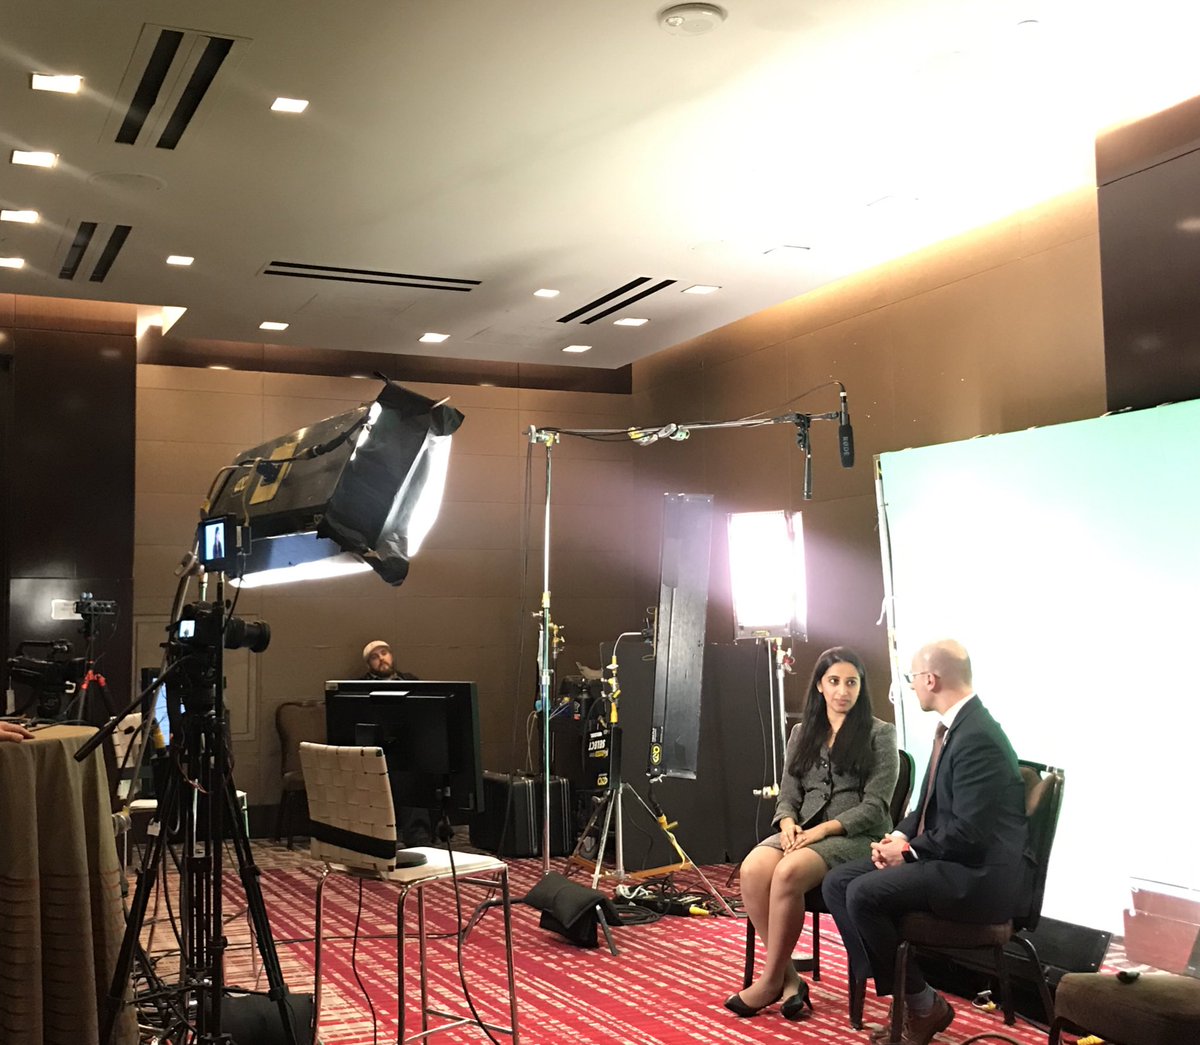 Just wrapped an interview with @drmeghaprasad the first @scaiwin #CHIP fellow - #SCAIFIT18 @SCAI